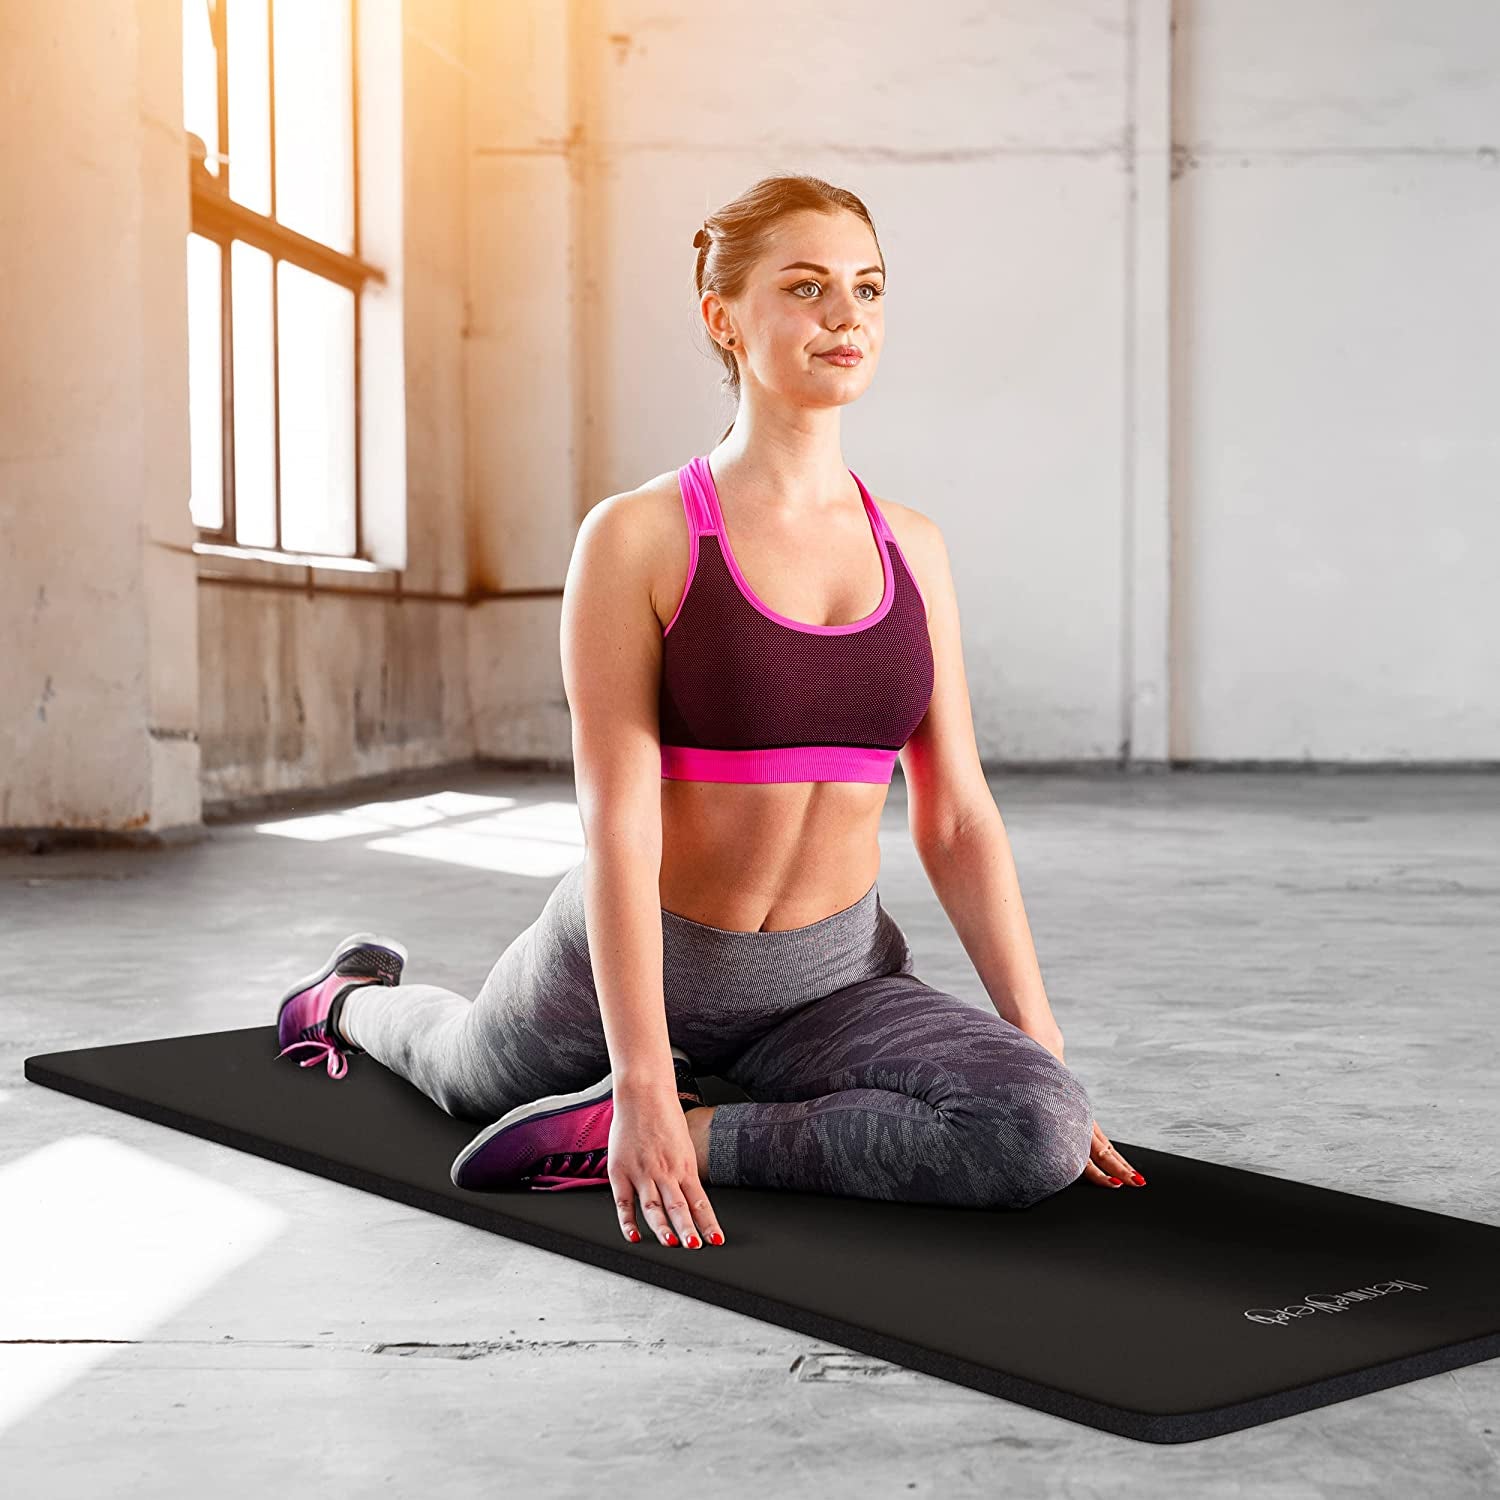 model stretches on cushioned black exercise mat